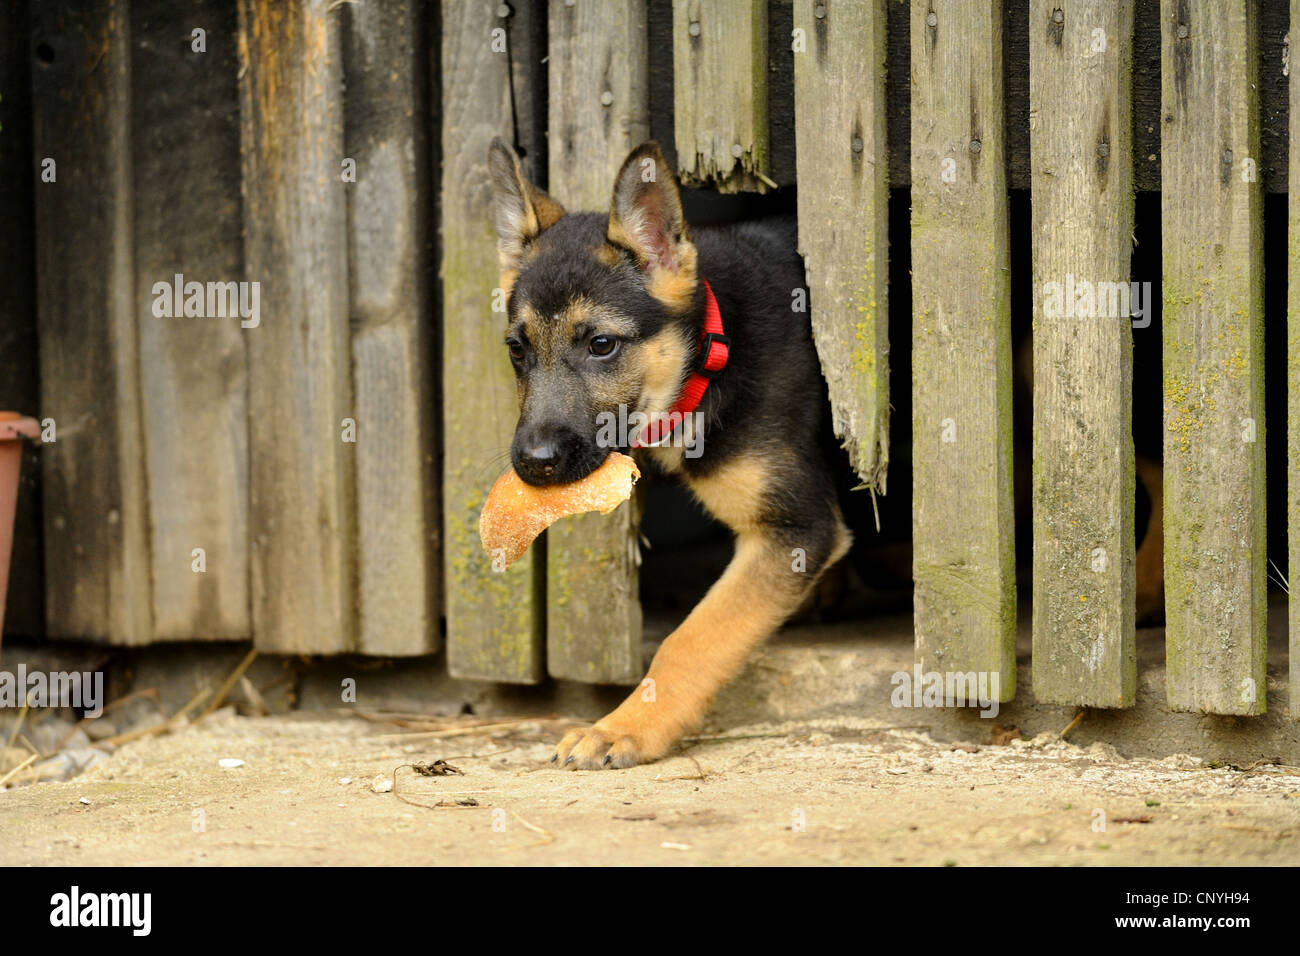 German Shepherd Dog (Canis lupus f. familiaris), puppy with old bred getting out of a hole in wooden fence, Germany Stock Photo